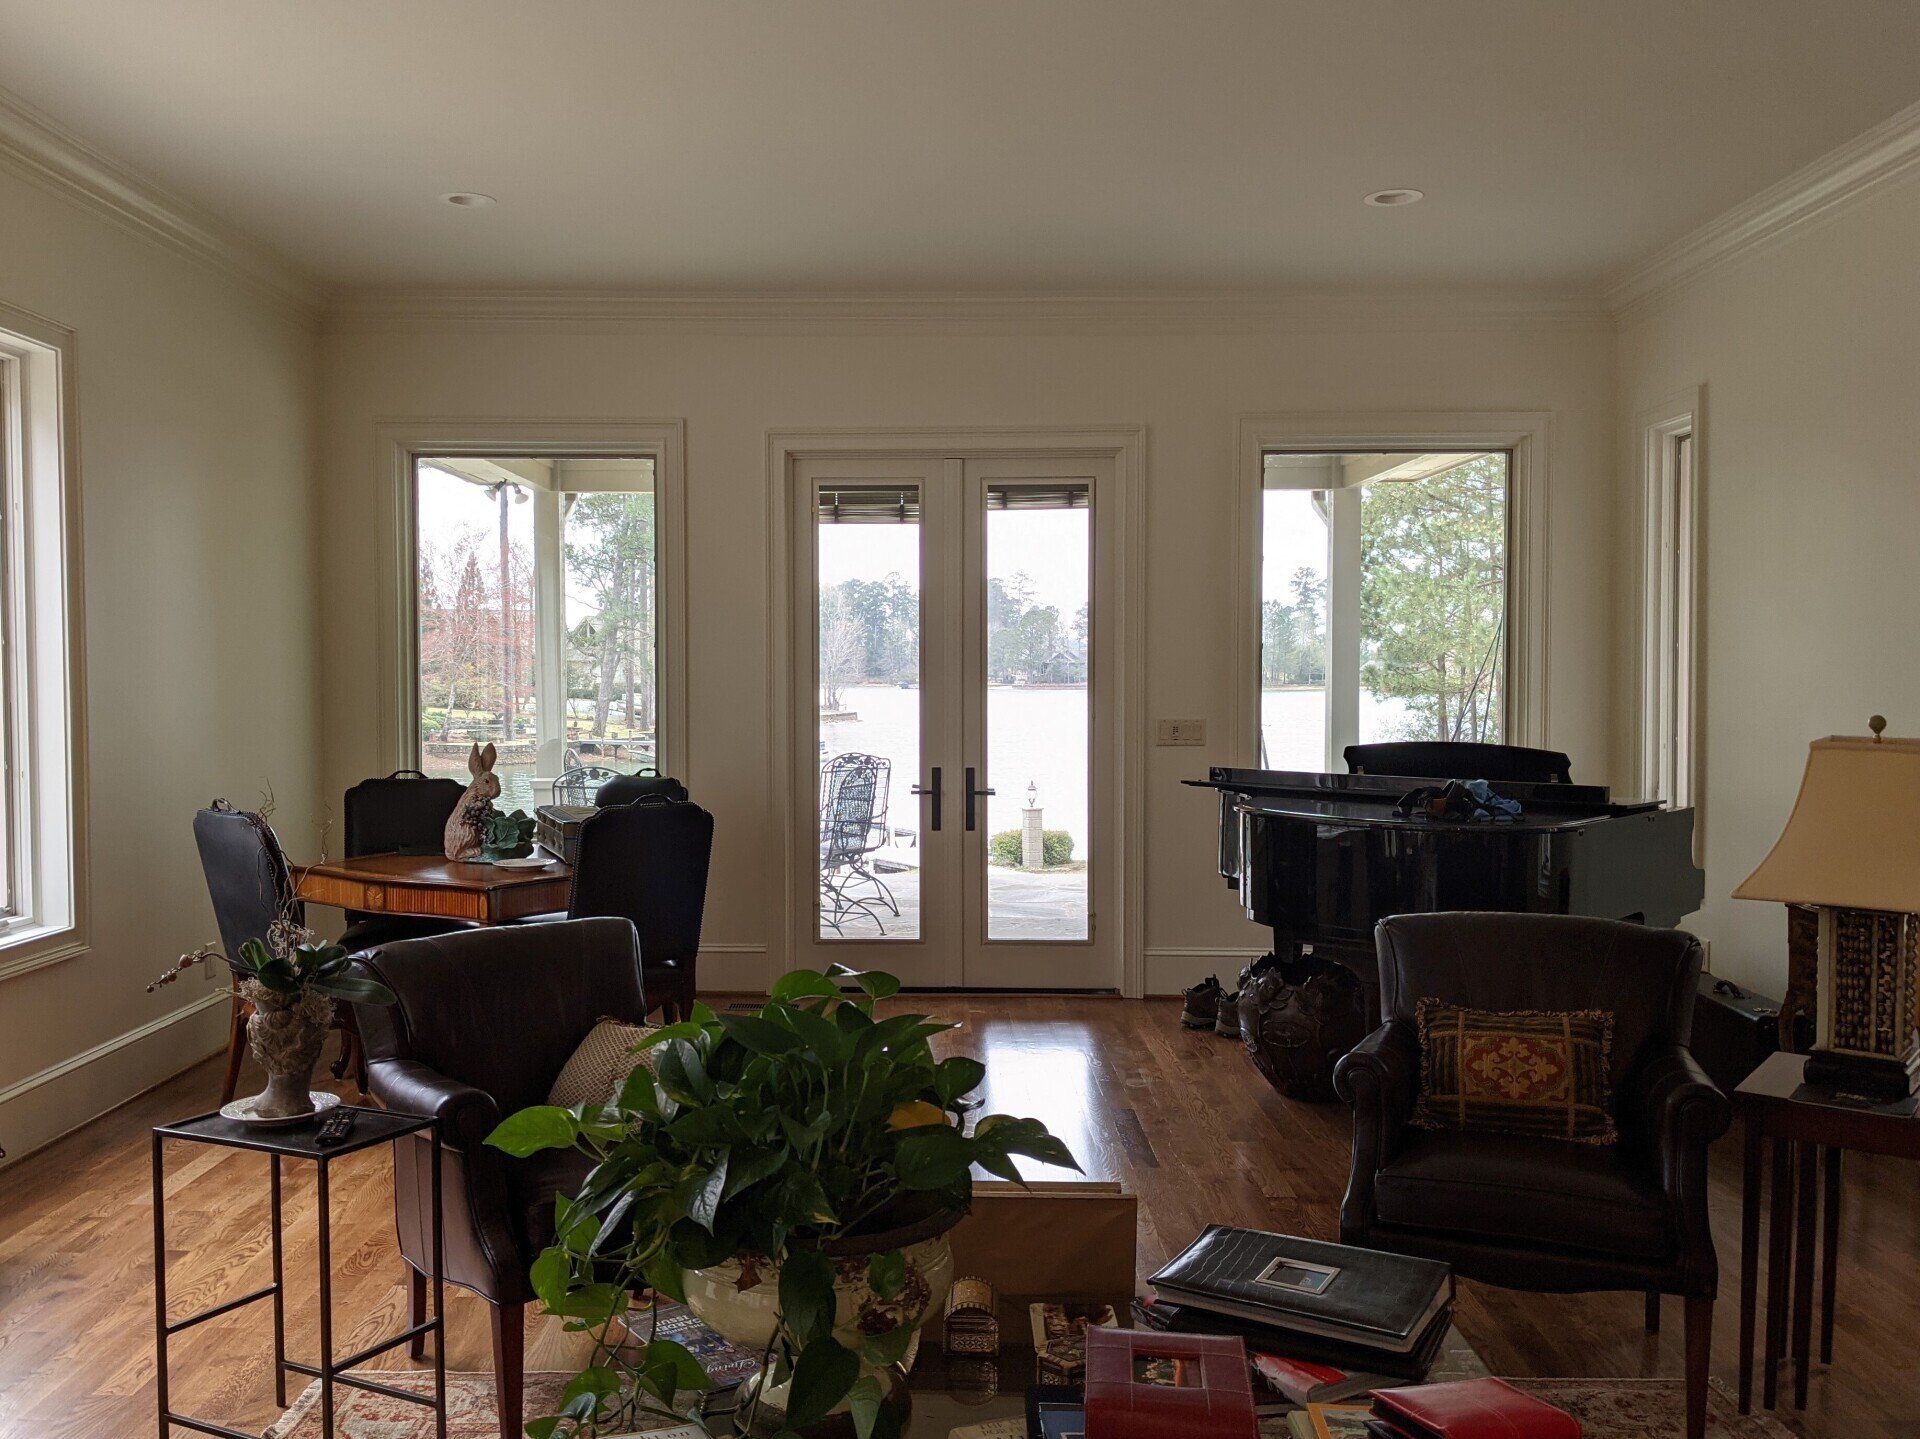 Residential tinting in Alex City, AL - Now High Visual Clarity has been fully achieved. Enhancing the view inside of this home and while looking out on Lake Martin in Alexander City, AL.